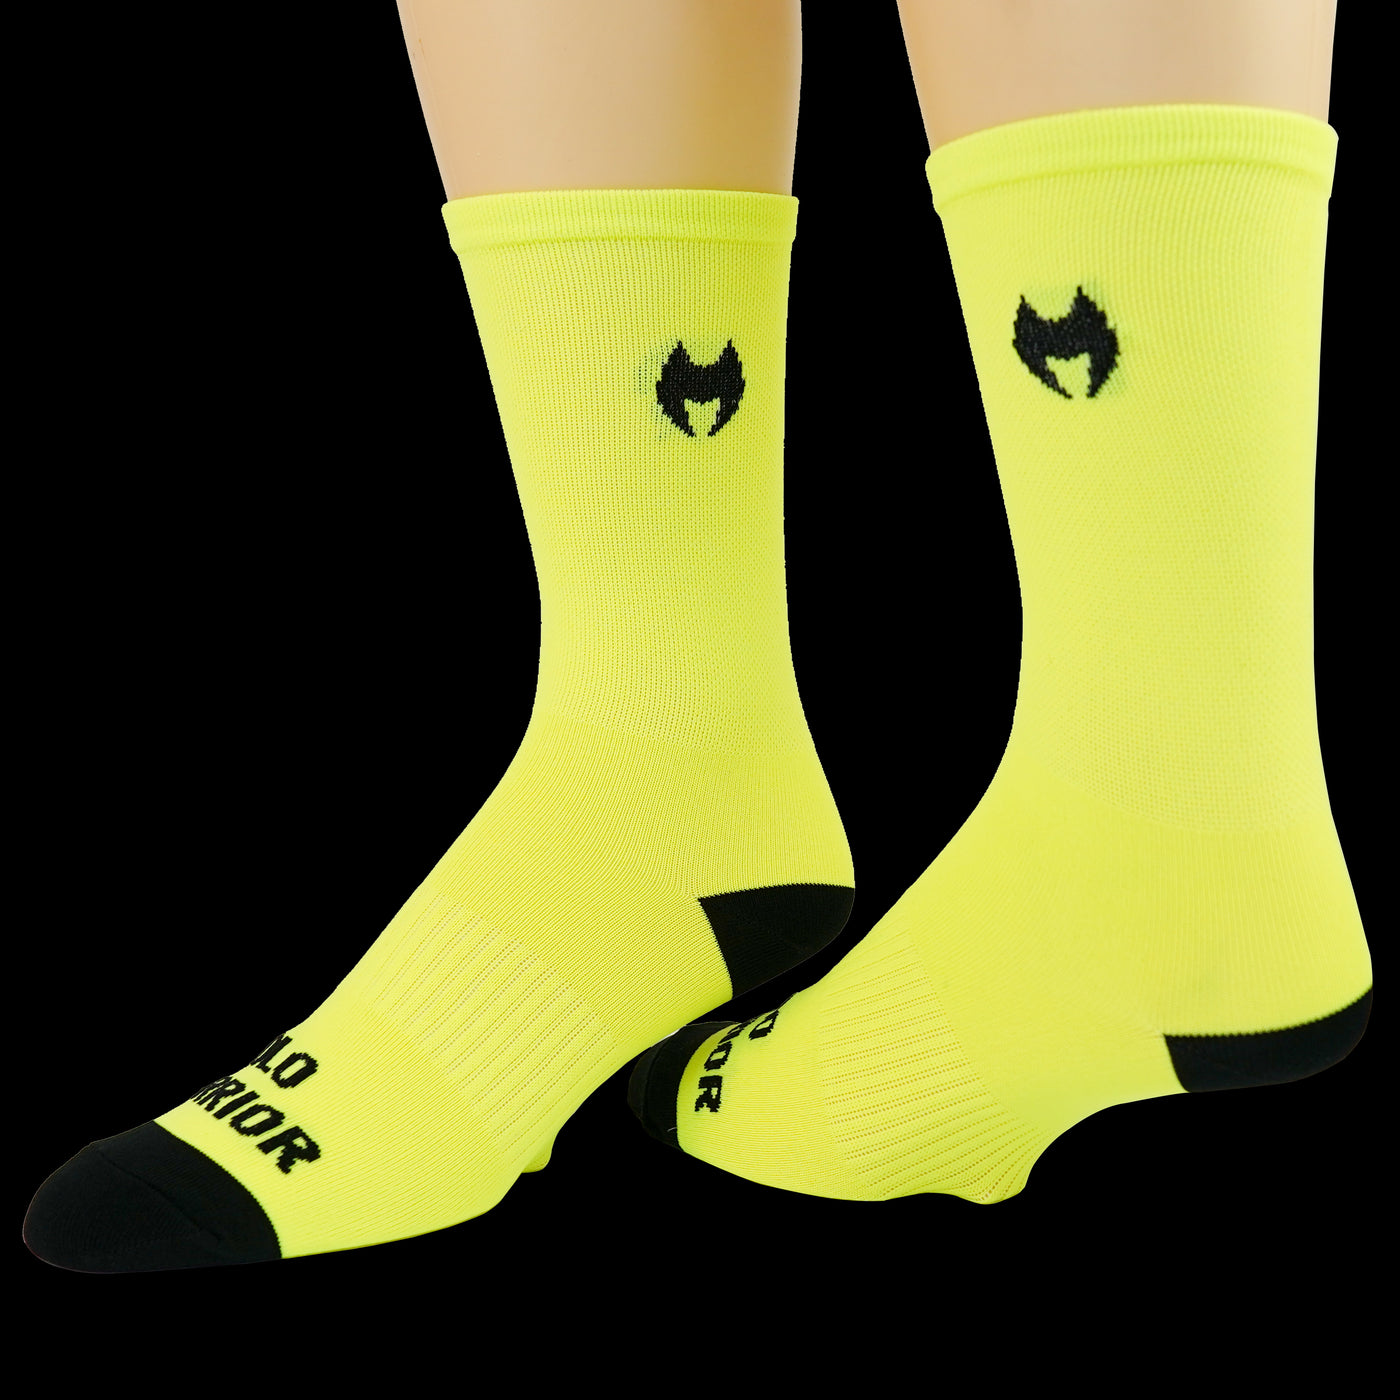 The New 2.0 6” Men’s and Women’s, Solid Fluorescent Green, Compression, Cycling socks.